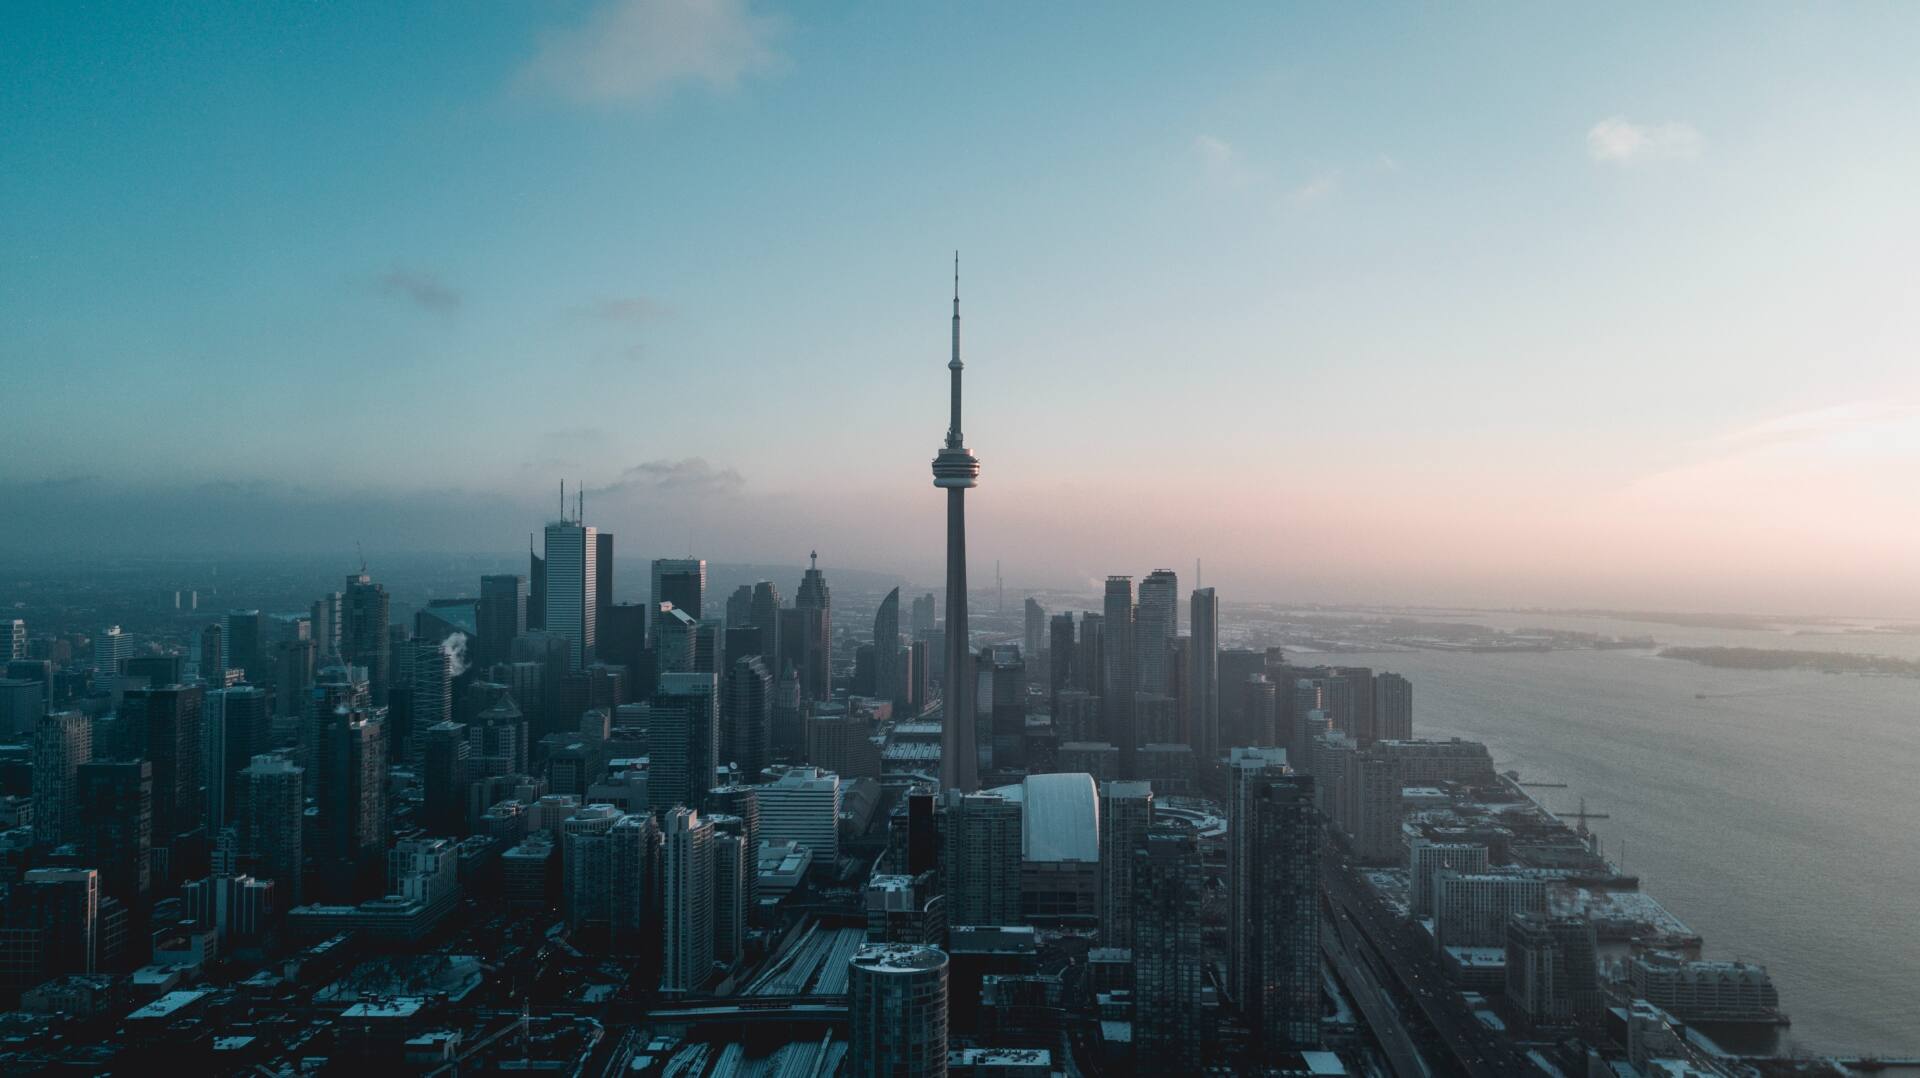 A hero image of a Toronto skyline with CN tower in the centre